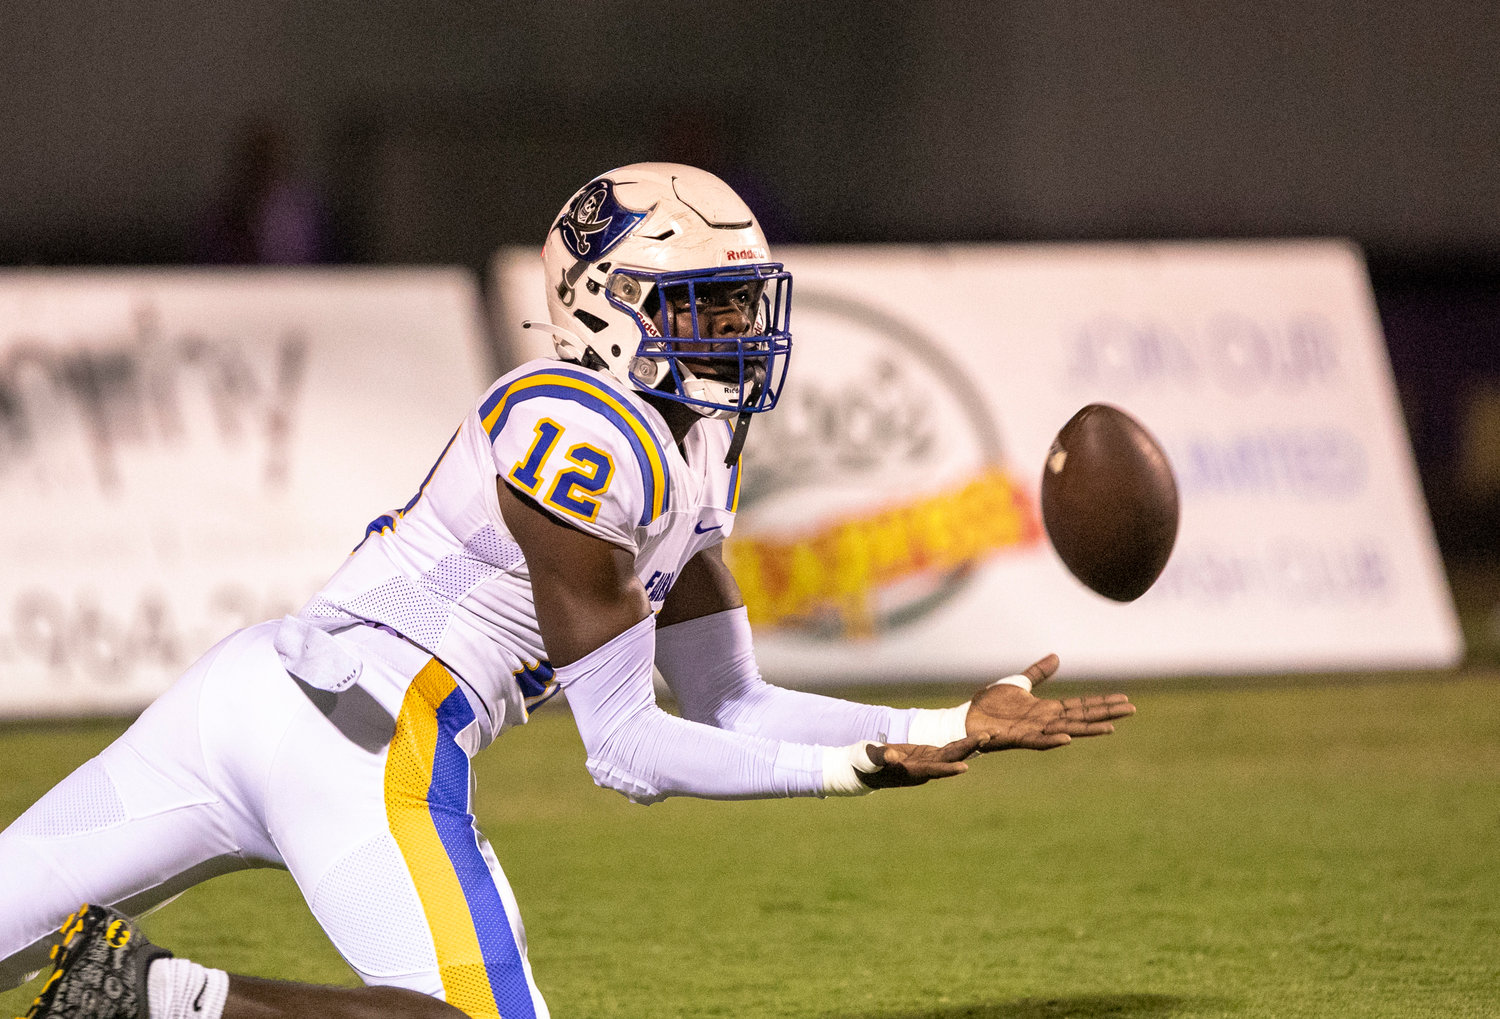 Fairhope’s Lashavion Brown eyes an errant pass near the end zone during the Pirates’ Class 7A Region 1 contest against the Daphne Trojans on the road Oct. 7. Brown and the Fairhope defense helped clinch a sixth consecutive playoff berth for the Pirates.